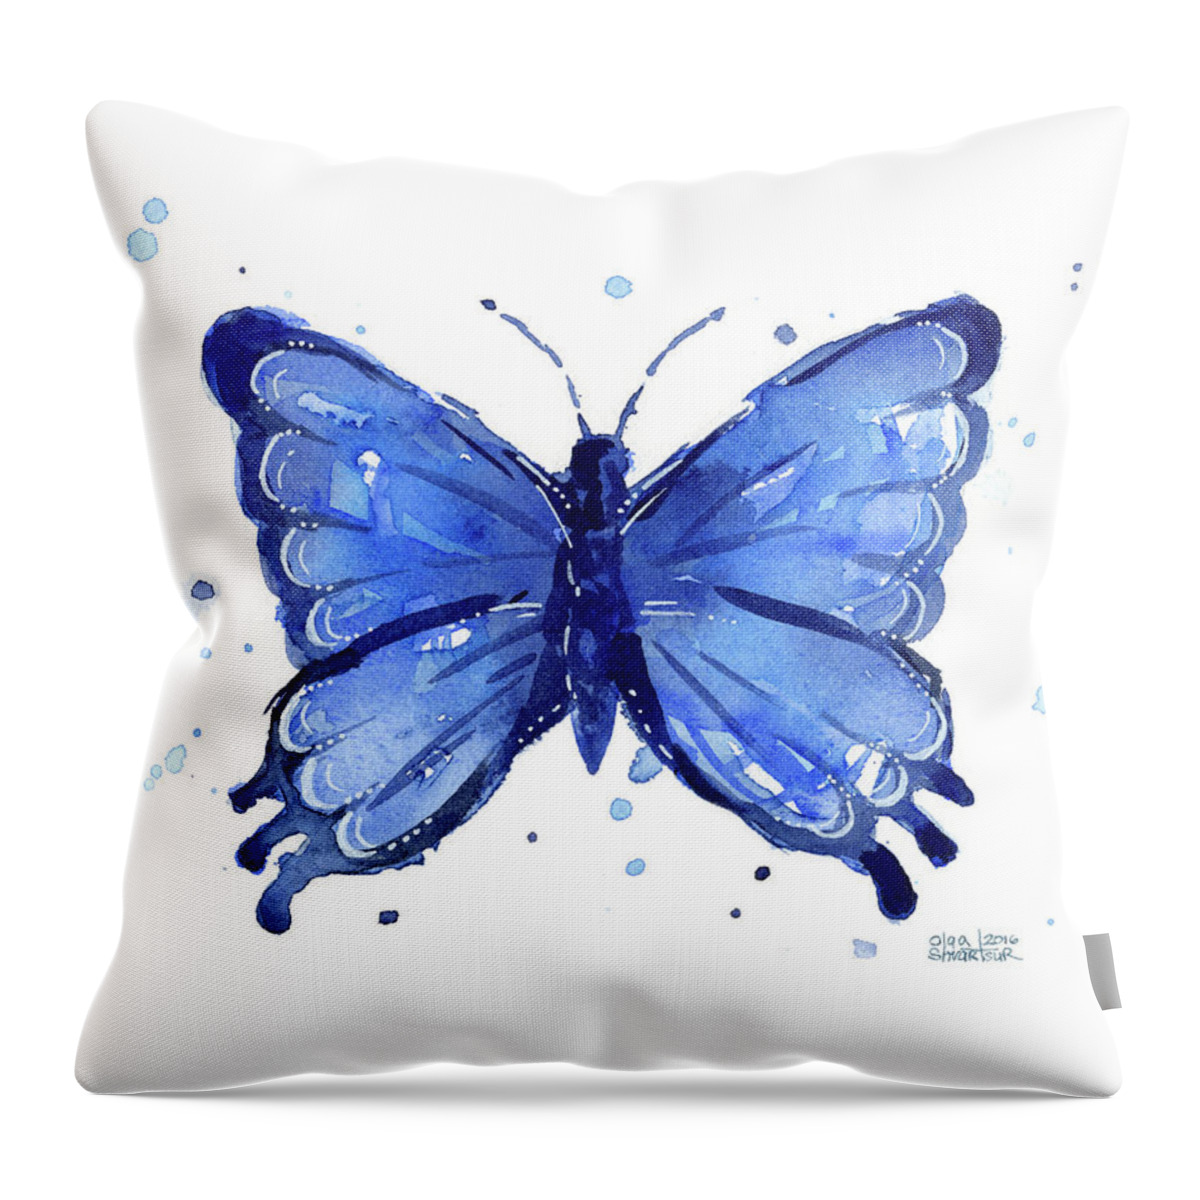 Watercolor Throw Pillow featuring the painting Butterfly Watercolor Blue by Olga Shvartsur